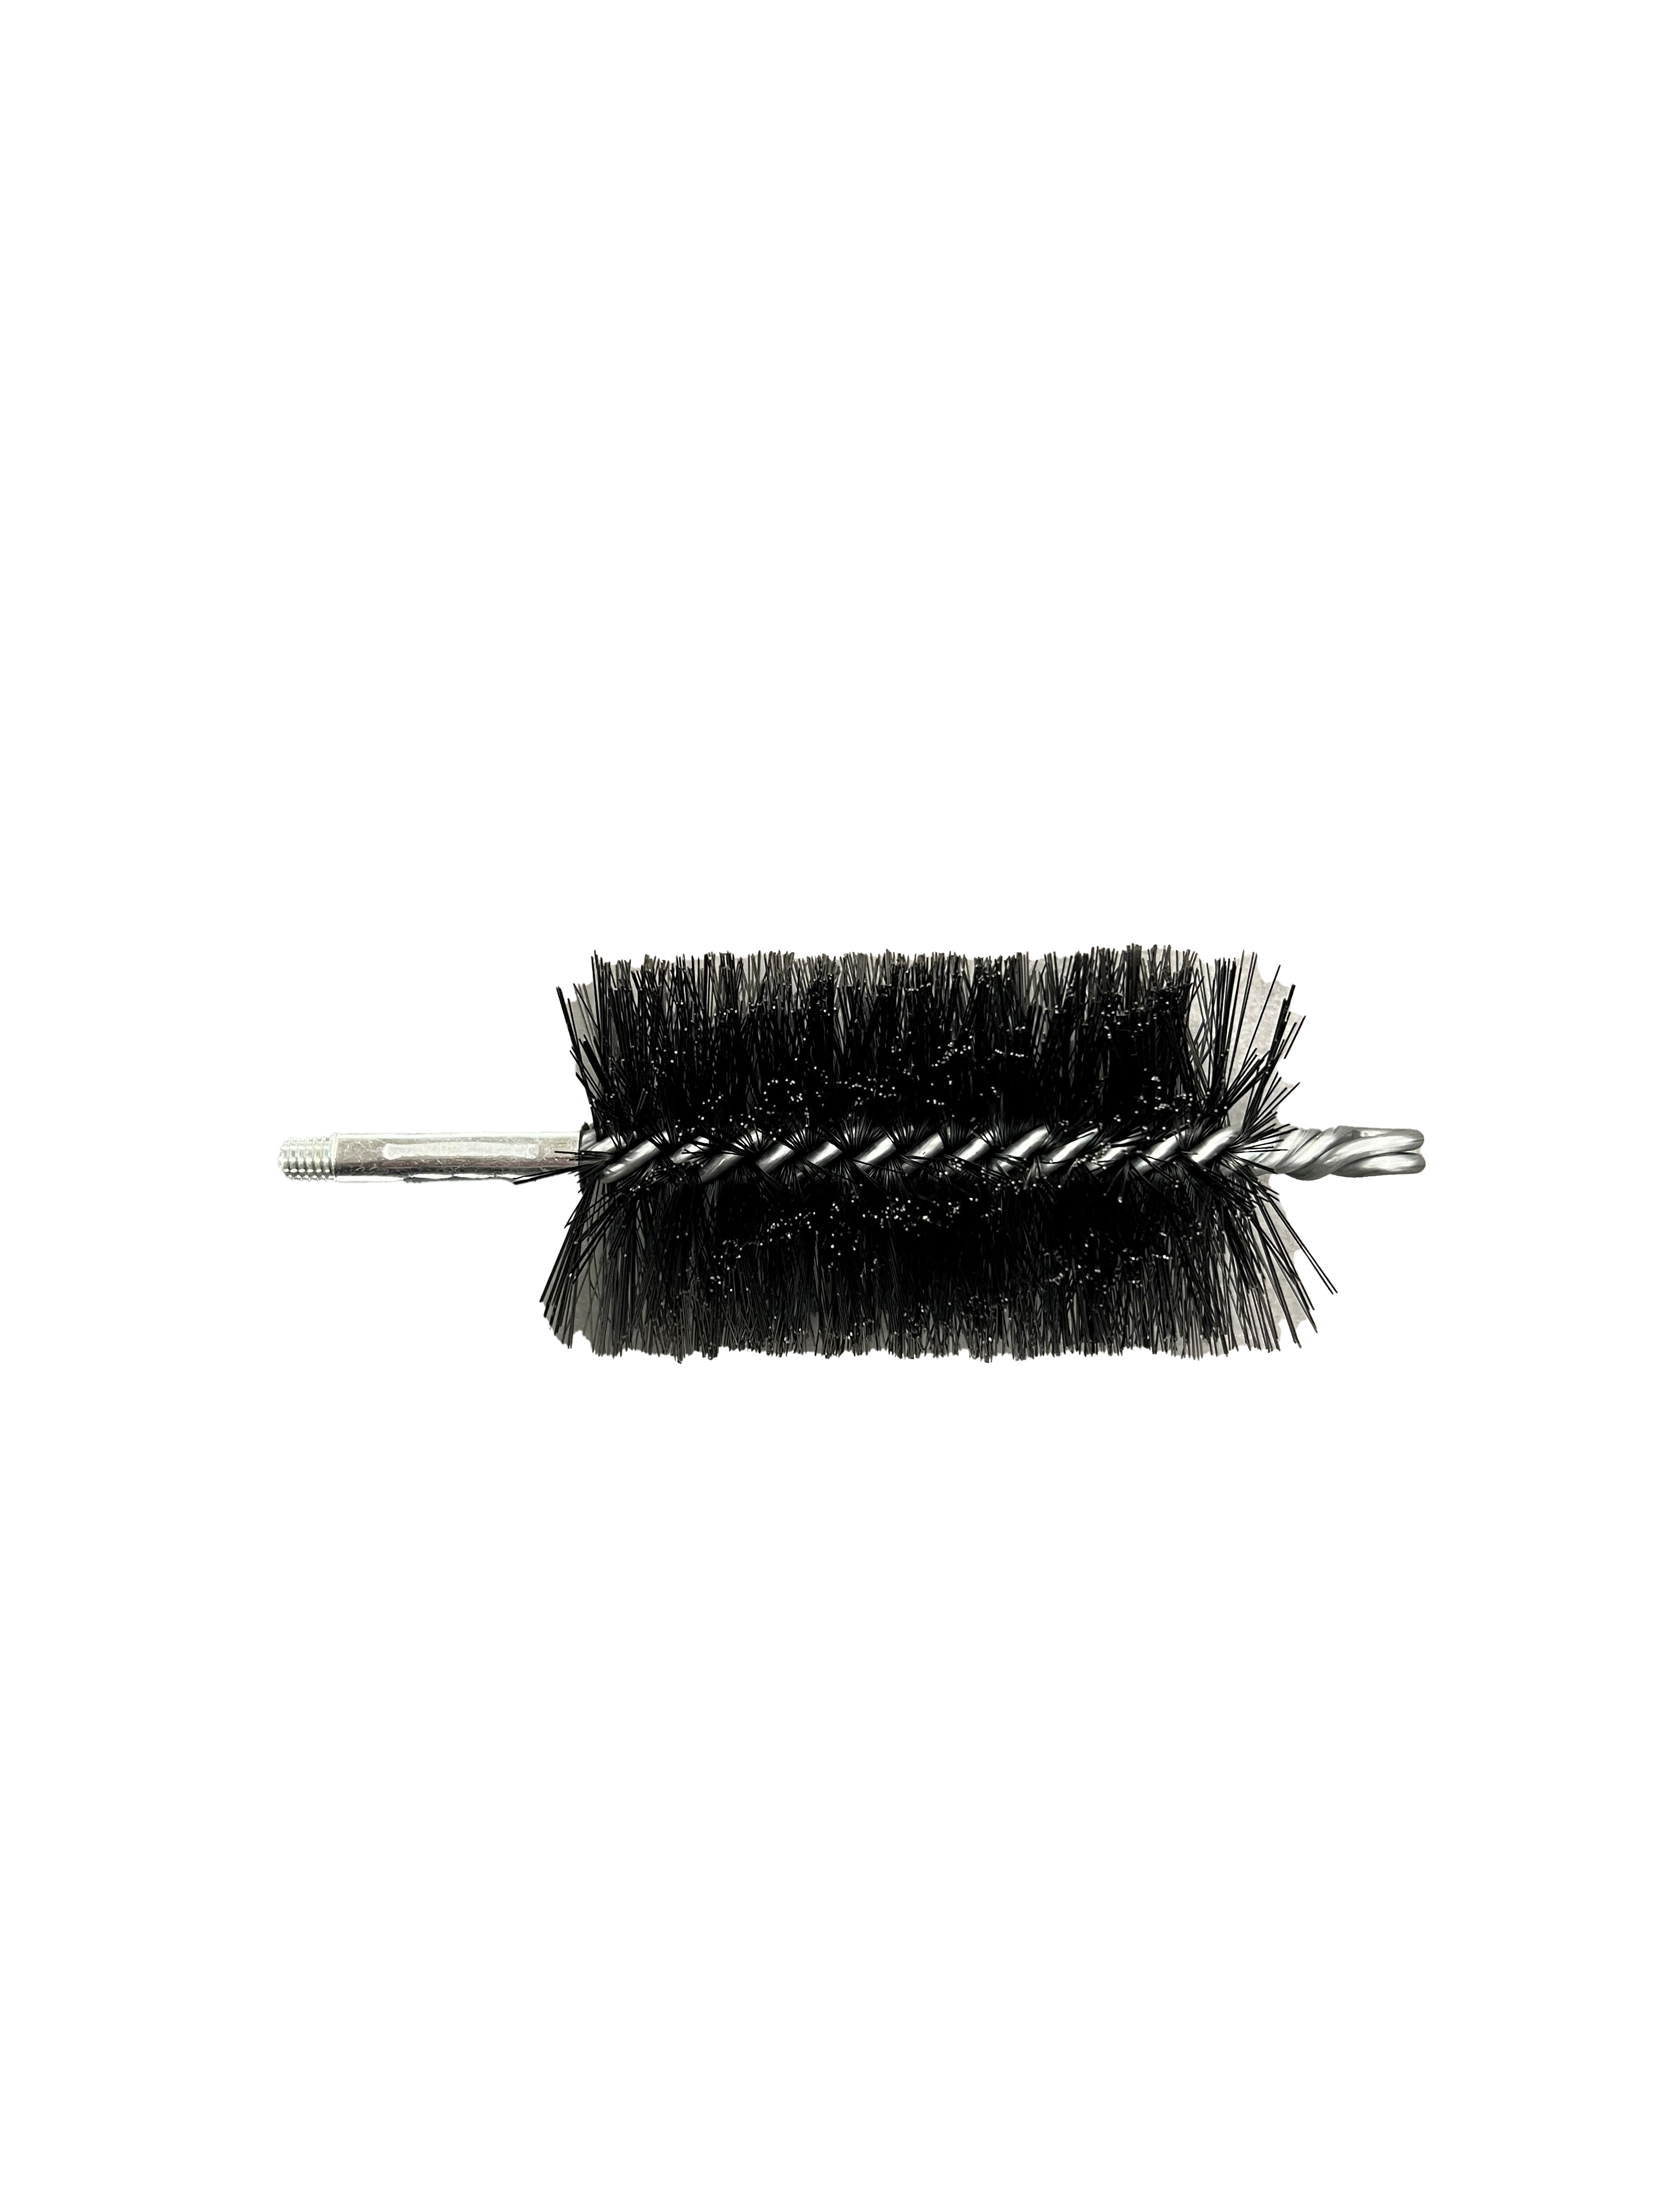 KlWY/SkuImages/1ed08d13-1c21-4396-bb93-cdac27db158a/round-brush-head.png